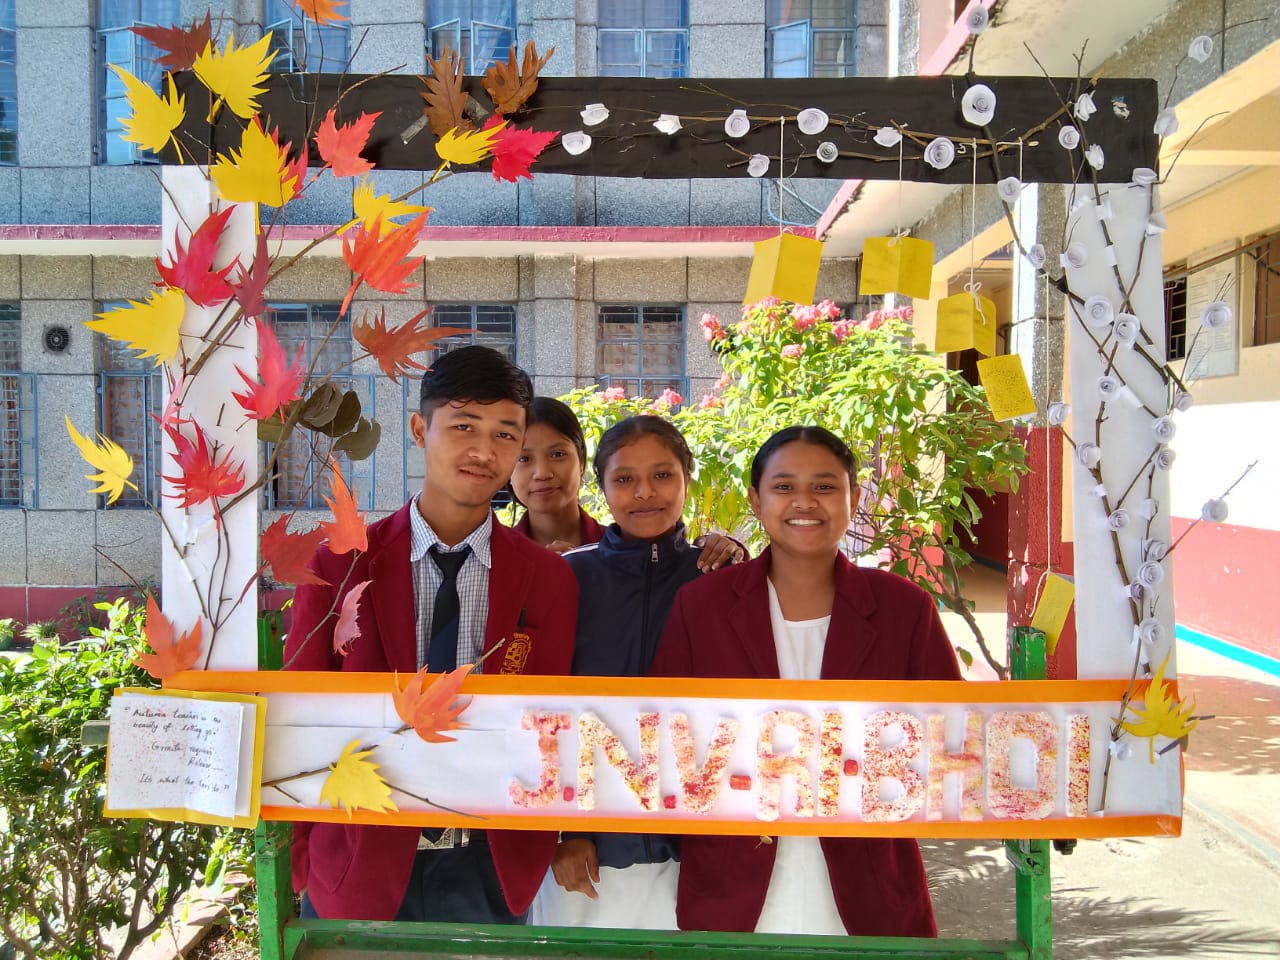 Photo Booth Created by JNV STudents